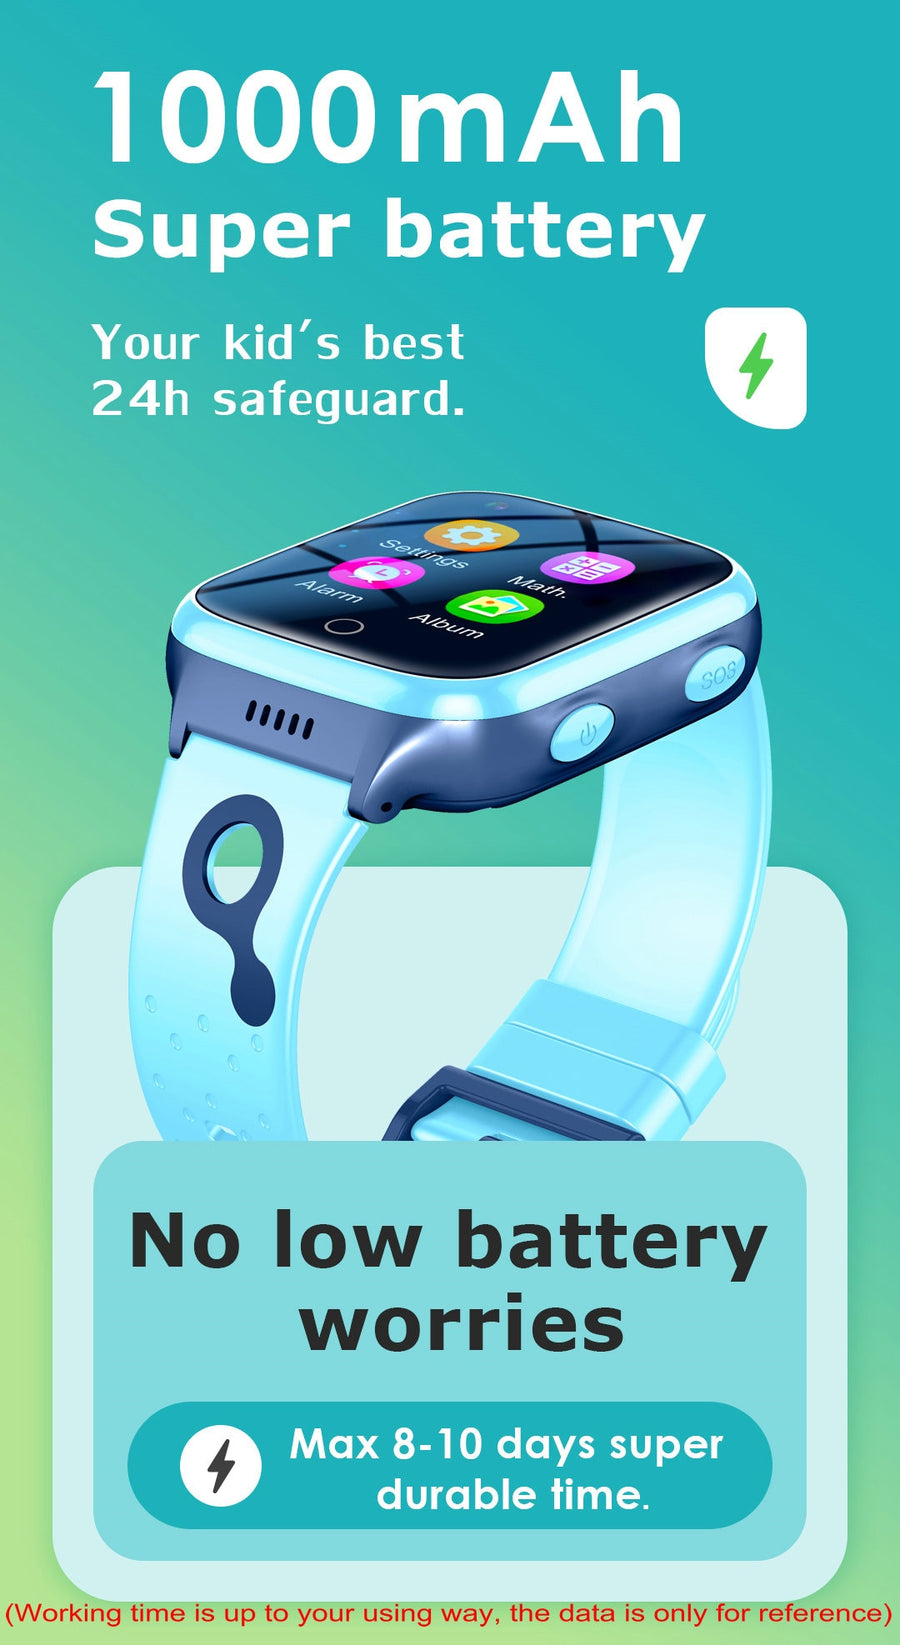 Smart Watch With GPS & WIFI For Kids - Stay Connected and Safe Anytime, Anywhere!